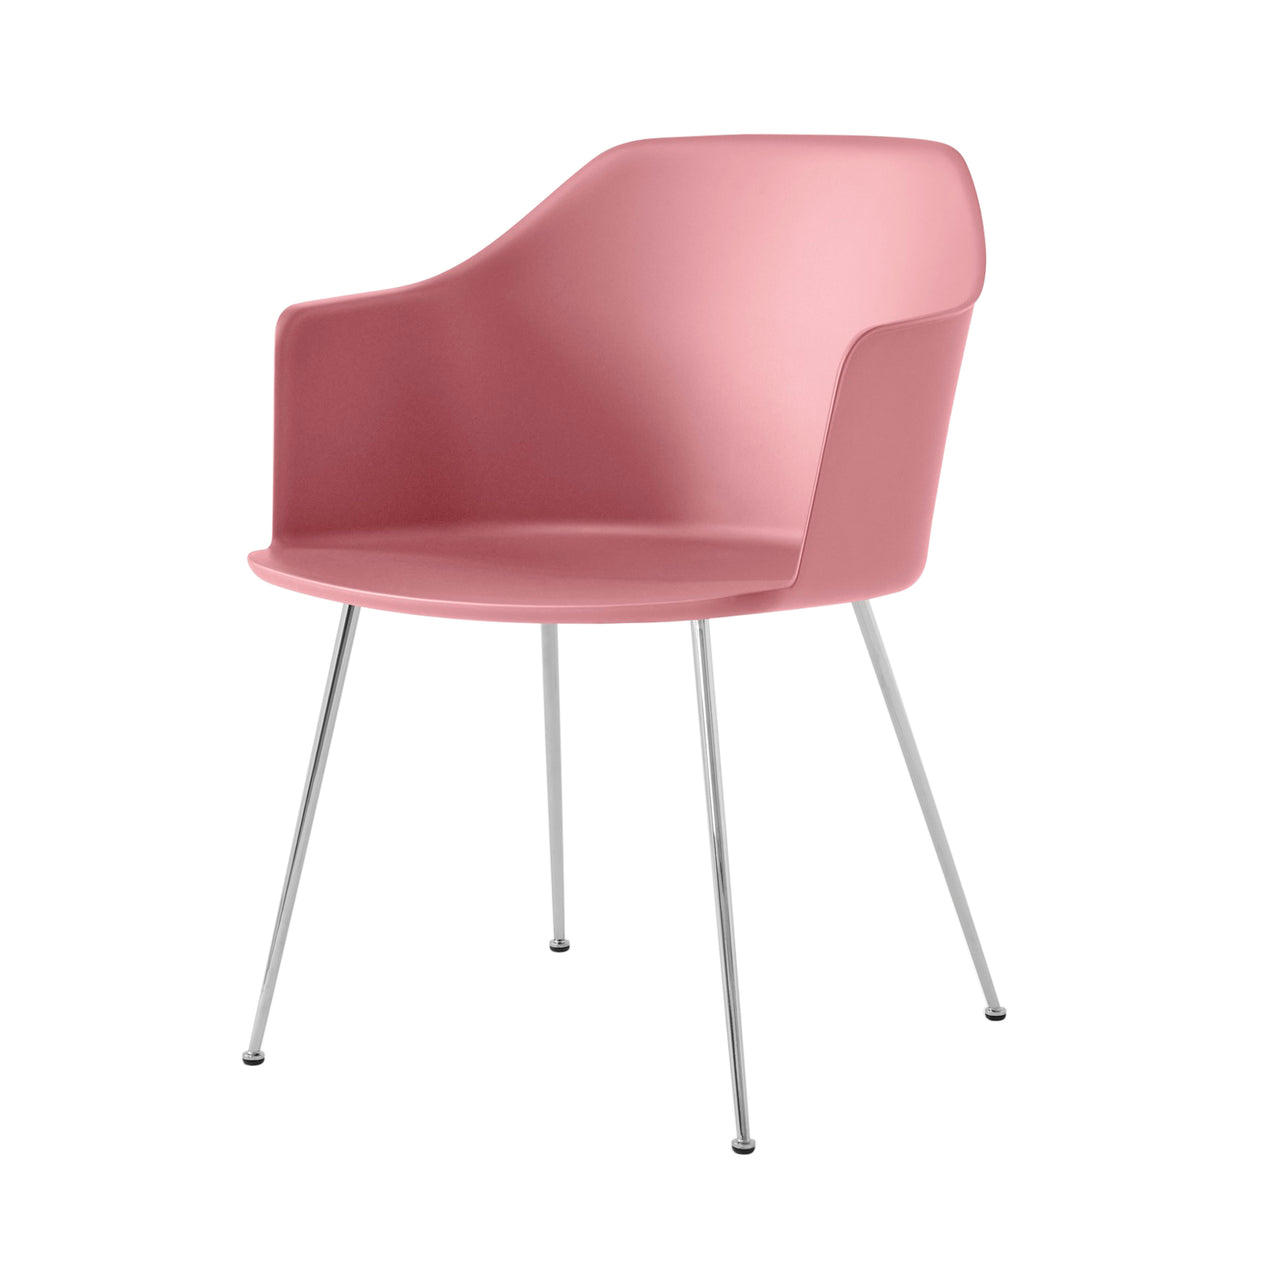 Rely Armchair HW33: Soft Pink + Chrome